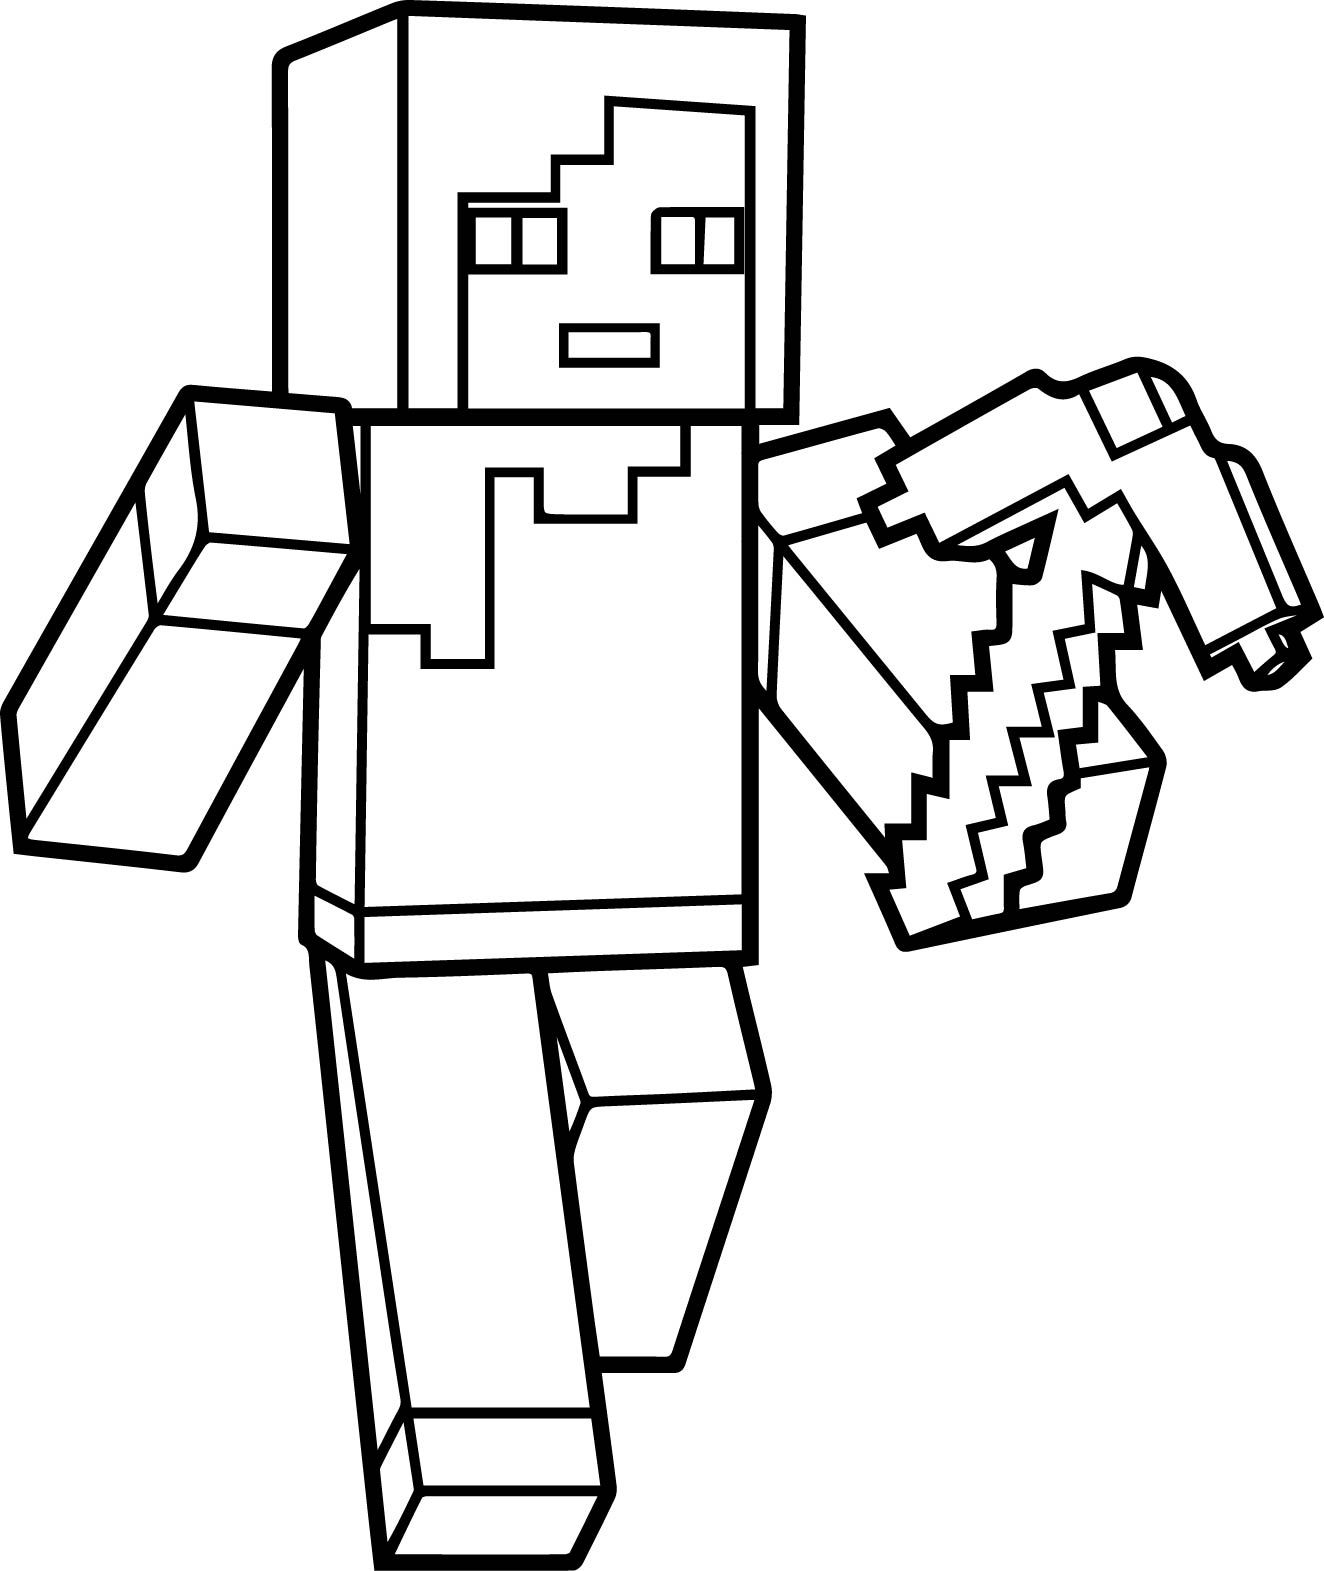 Minecraft Steve Coloring Pages at GetColoringscom Free